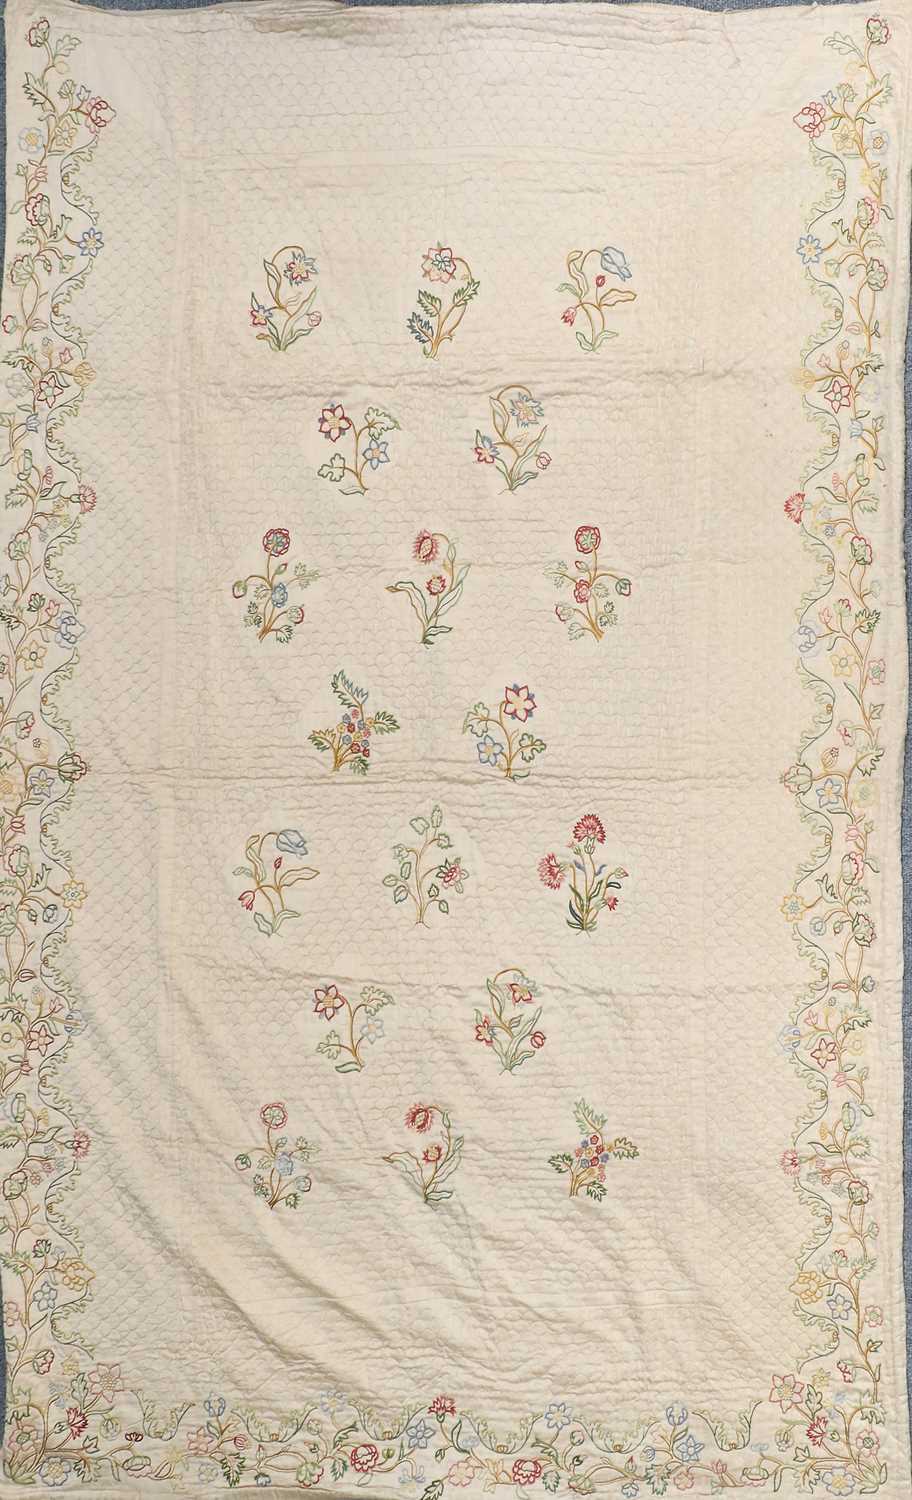 Early 20th Century Quilt, worked in purple and yellow patched shapes in alternating squares on a - Image 2 of 5